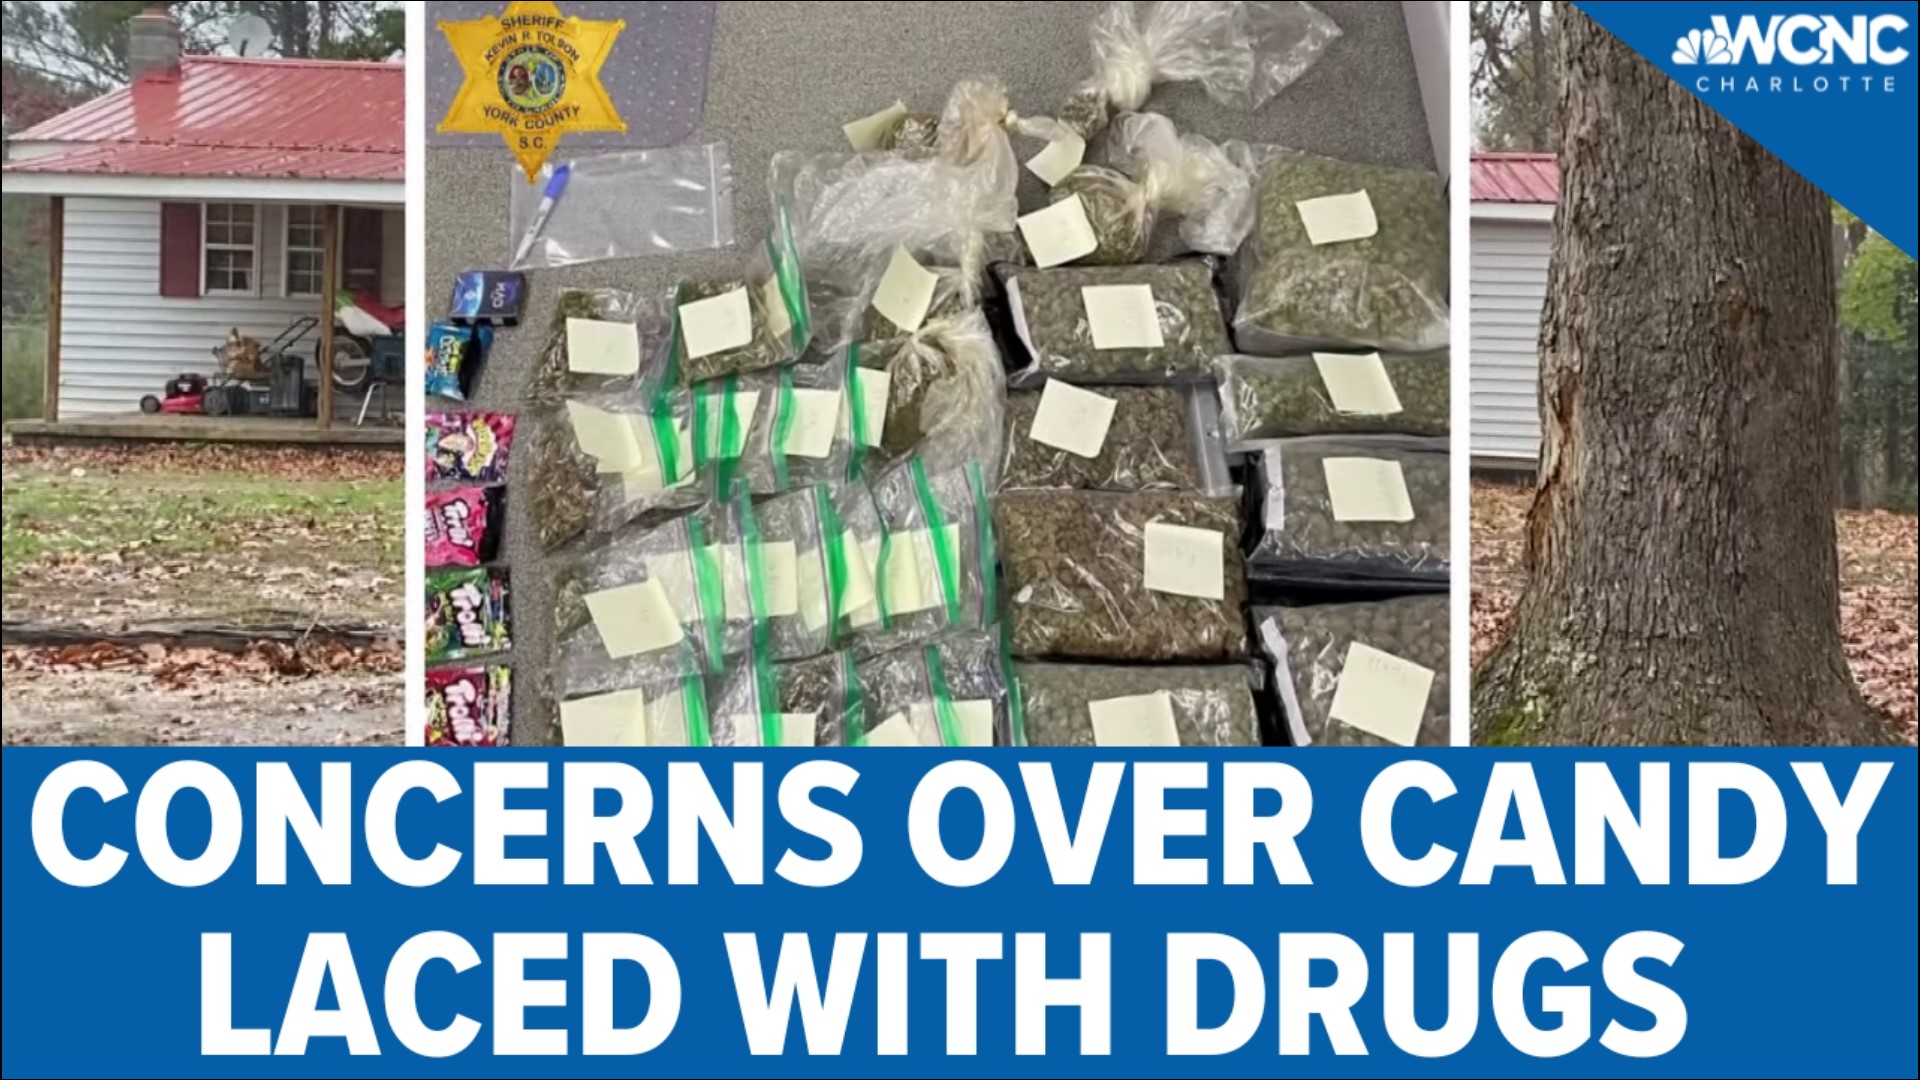 Authorities say they're worried candy laced with drugs could reach children.